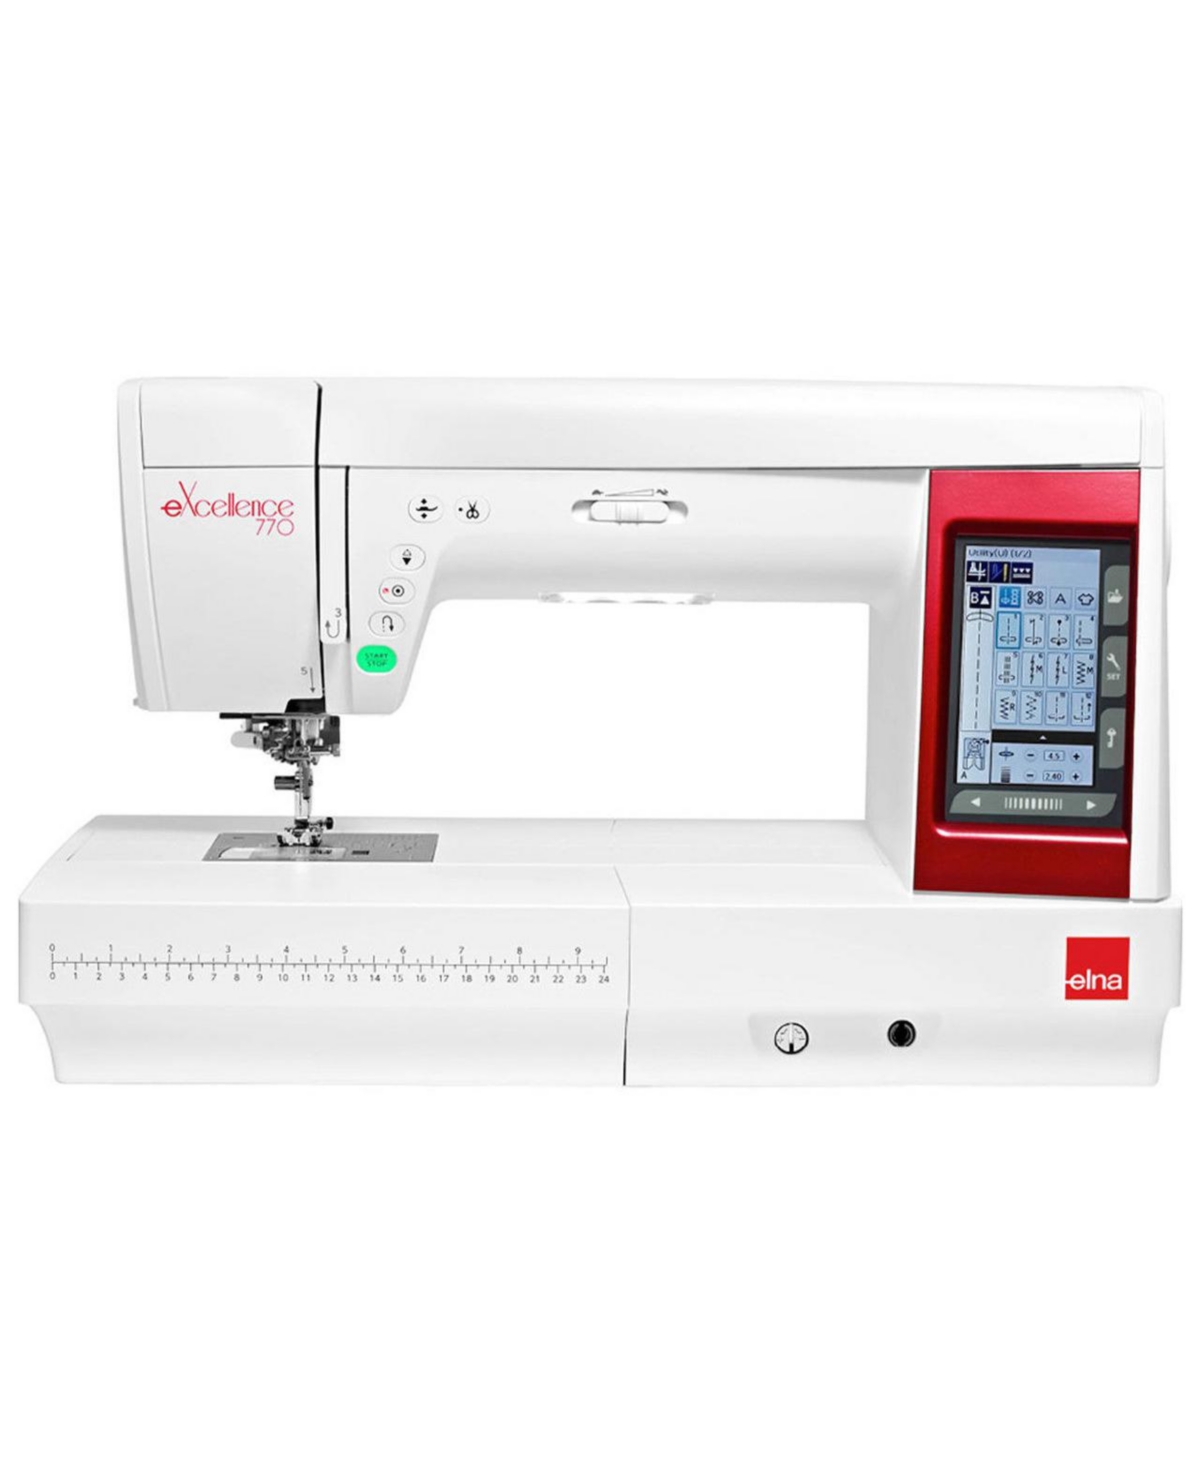 eXcellence 770 Sewing and Quilting Machine - White